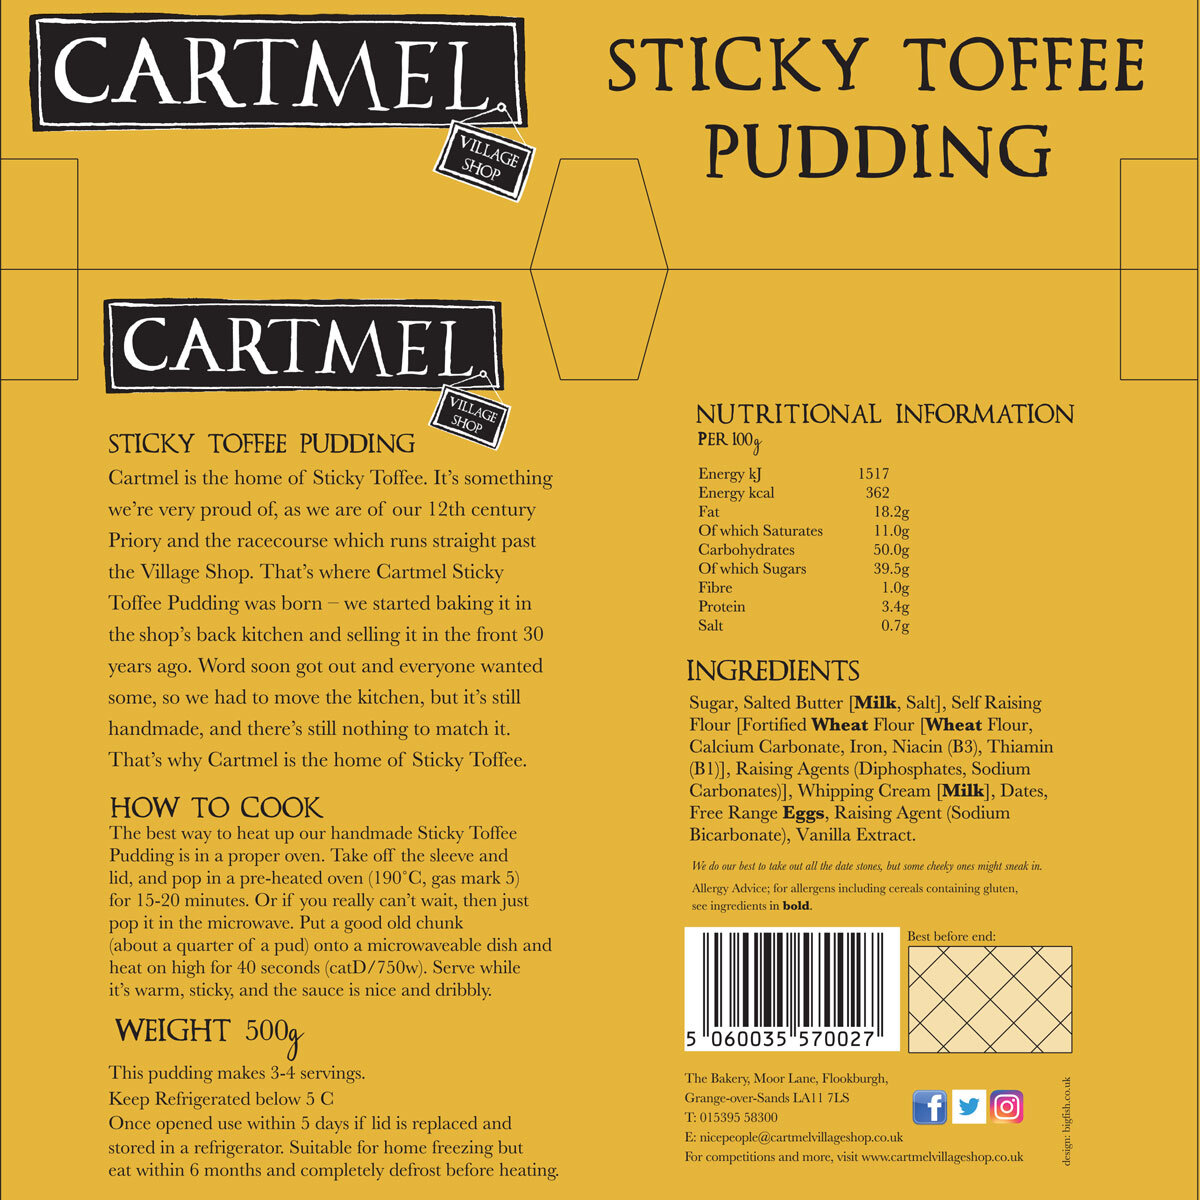 Image of artwork for Cartmel Sticky Toffee Pudding